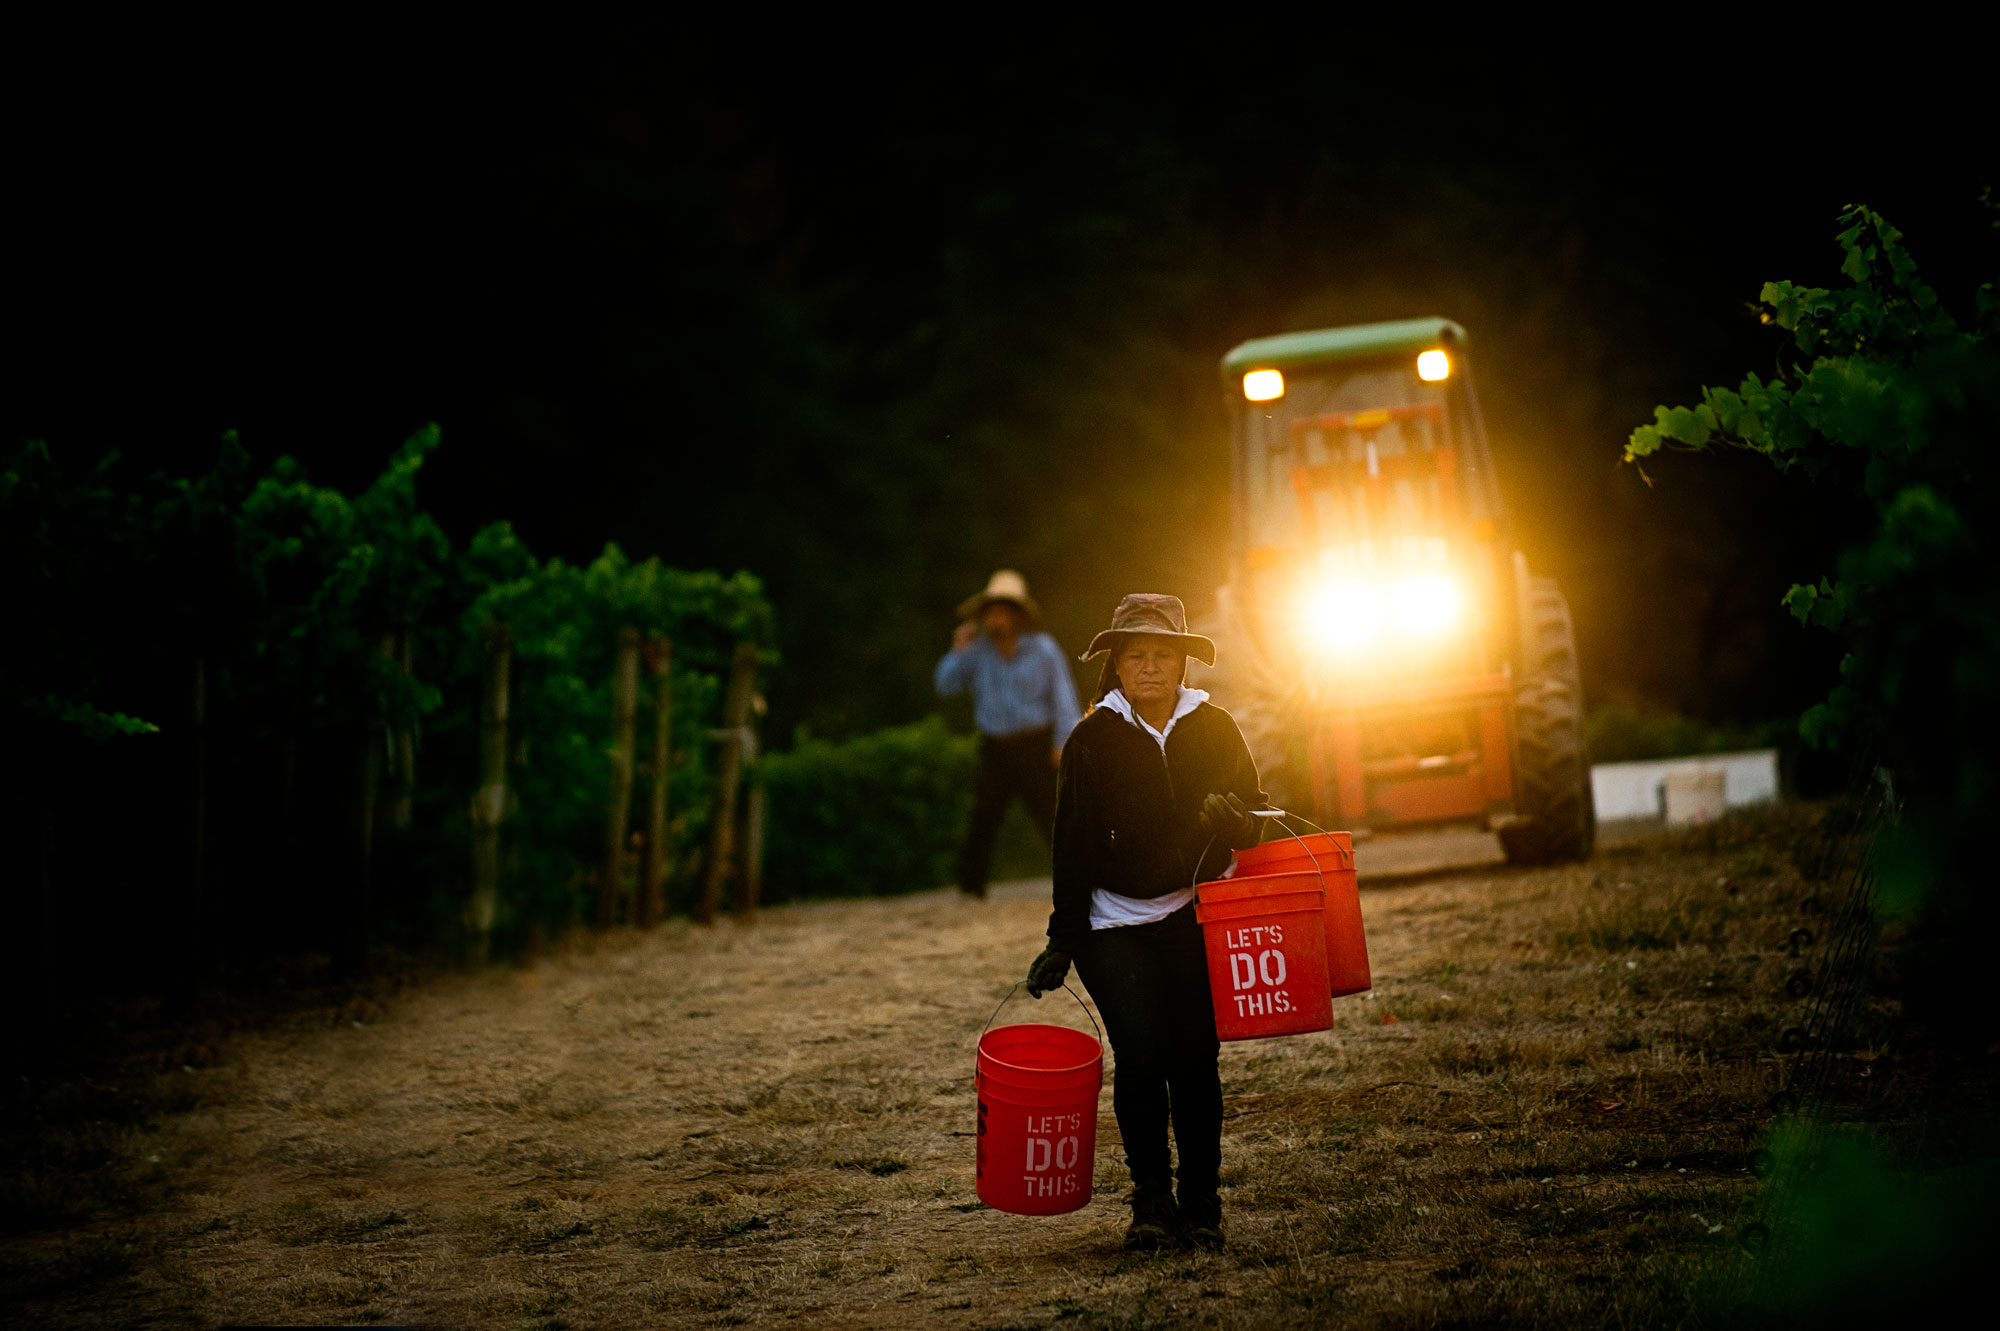 Tractor shining a light on a woman carrying buckets of grapes from harvest